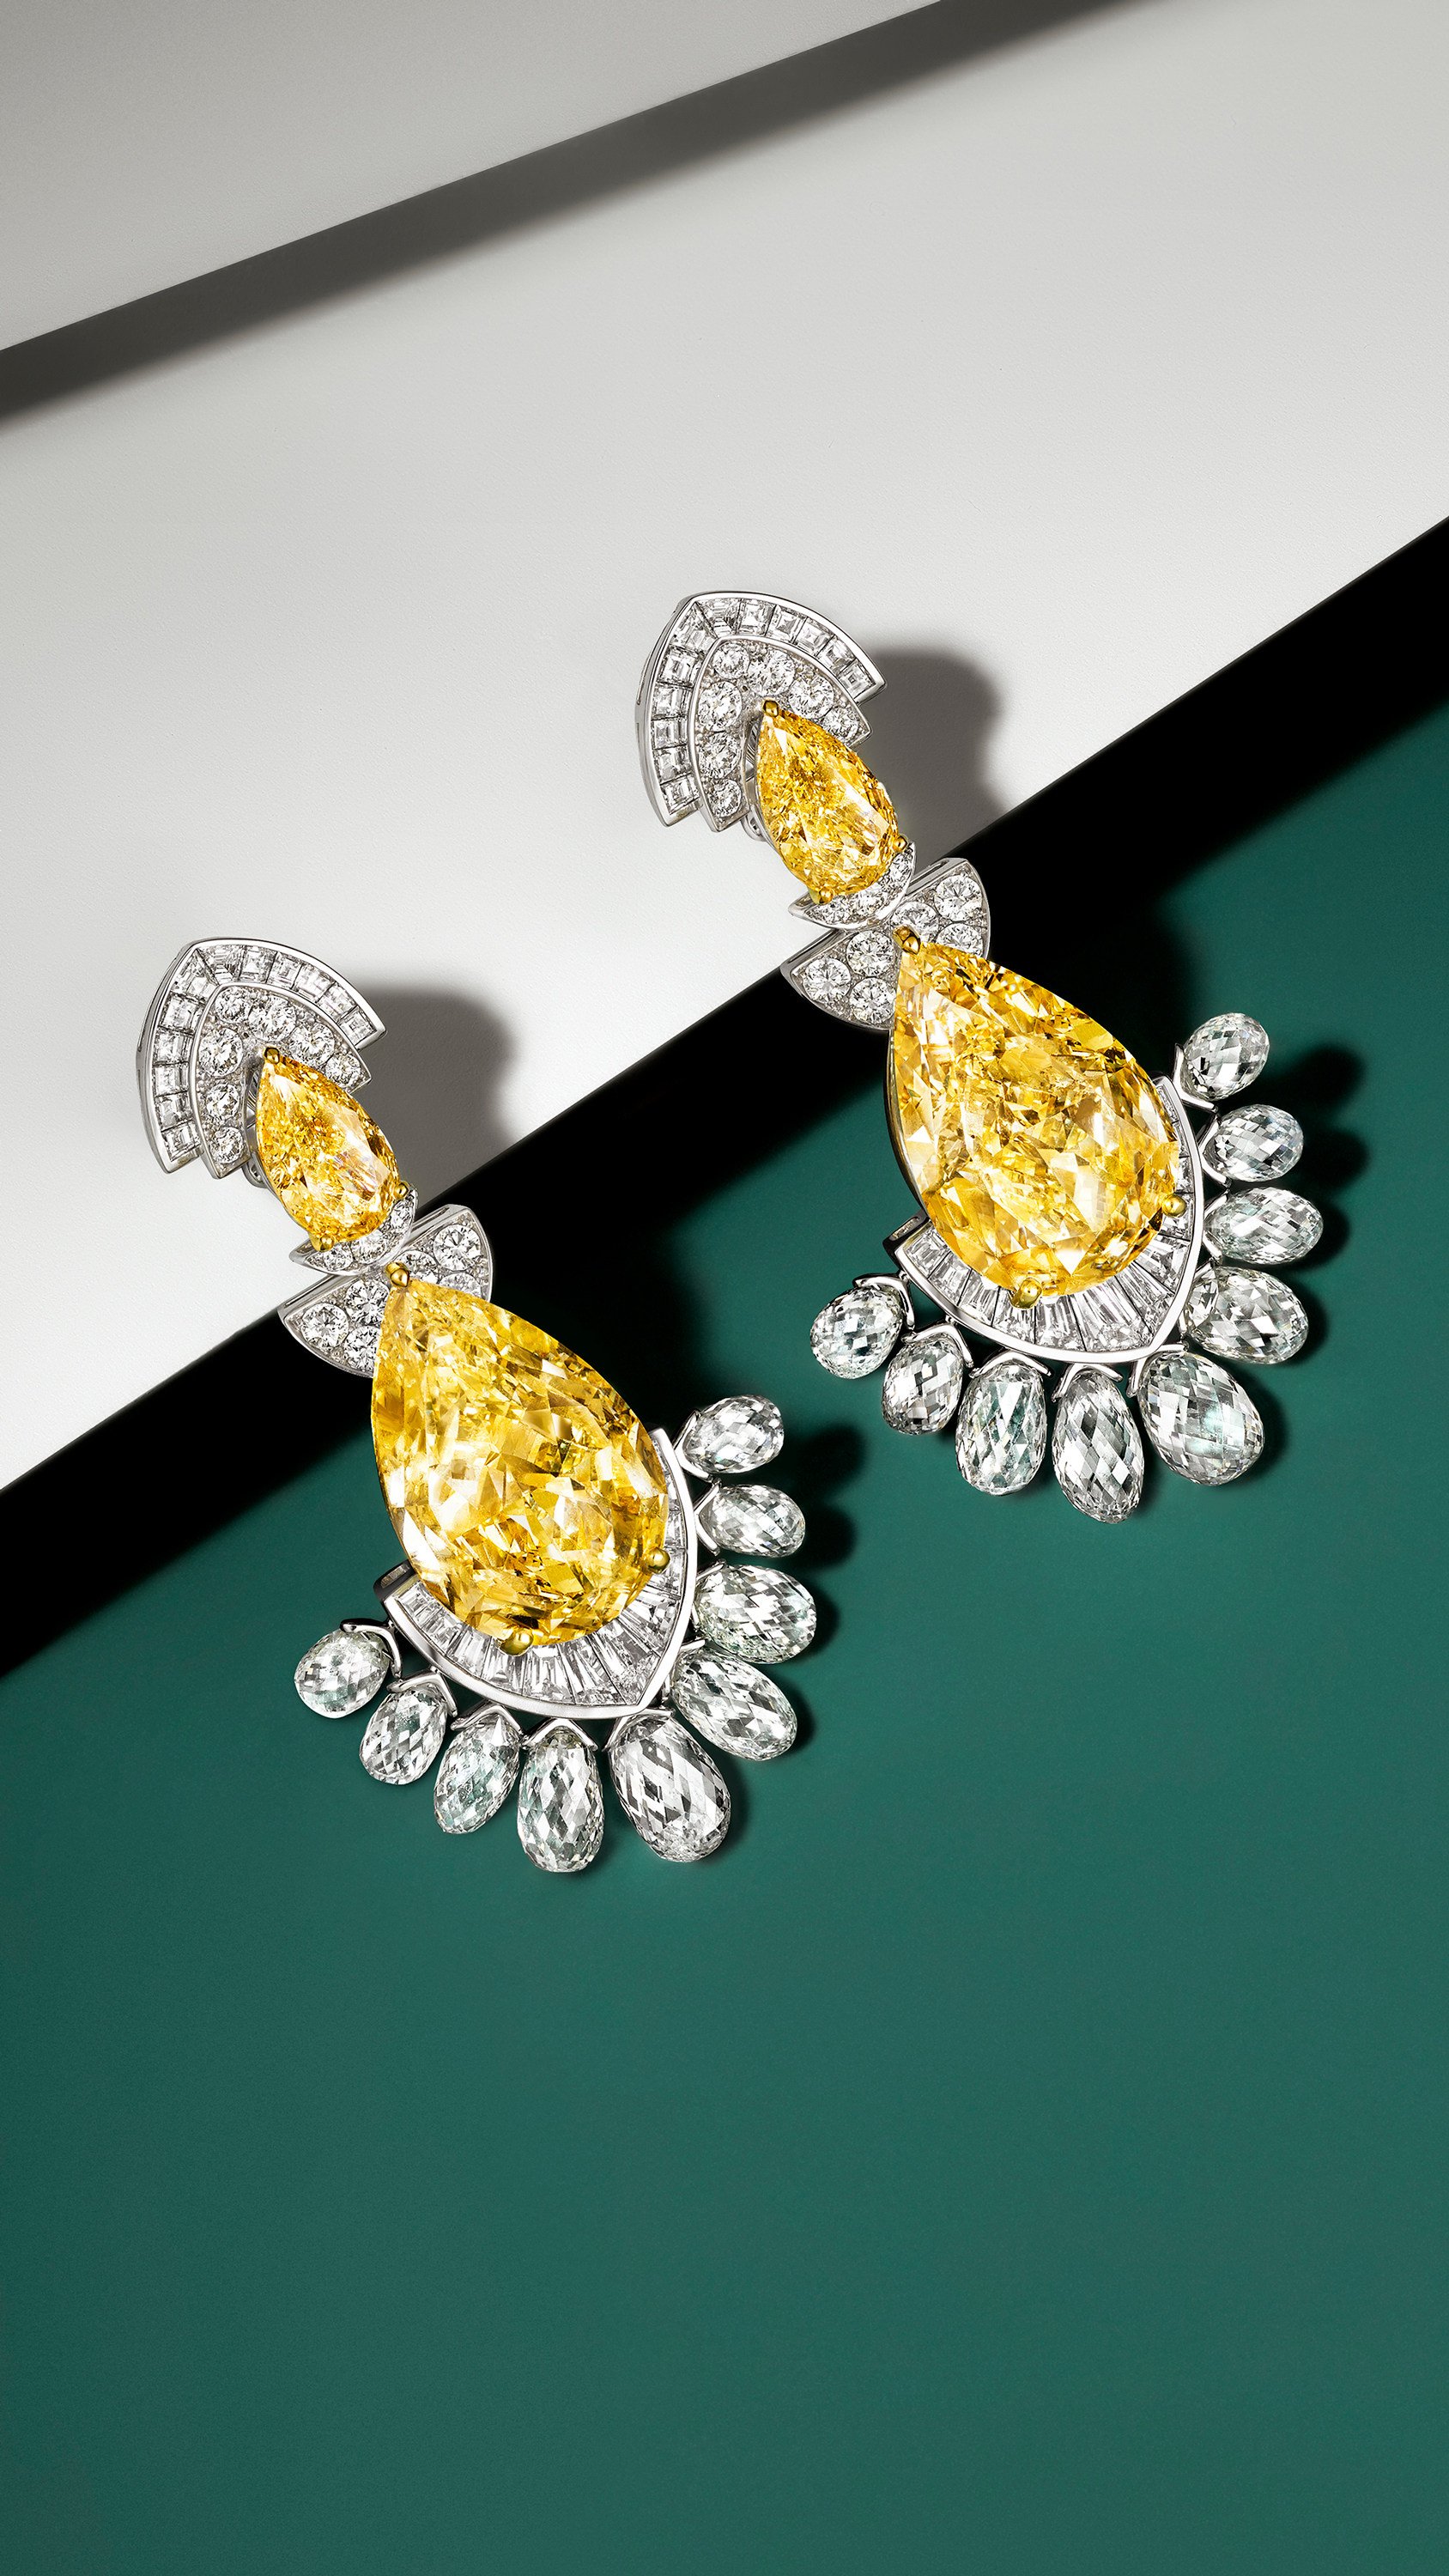 British jewellers Graff and yellow diamonds are a gem of a partnership and it all started with founder Laurence Graff naming the Star of Bombay – now a Paris exhibition charts their success. Photo: Handout